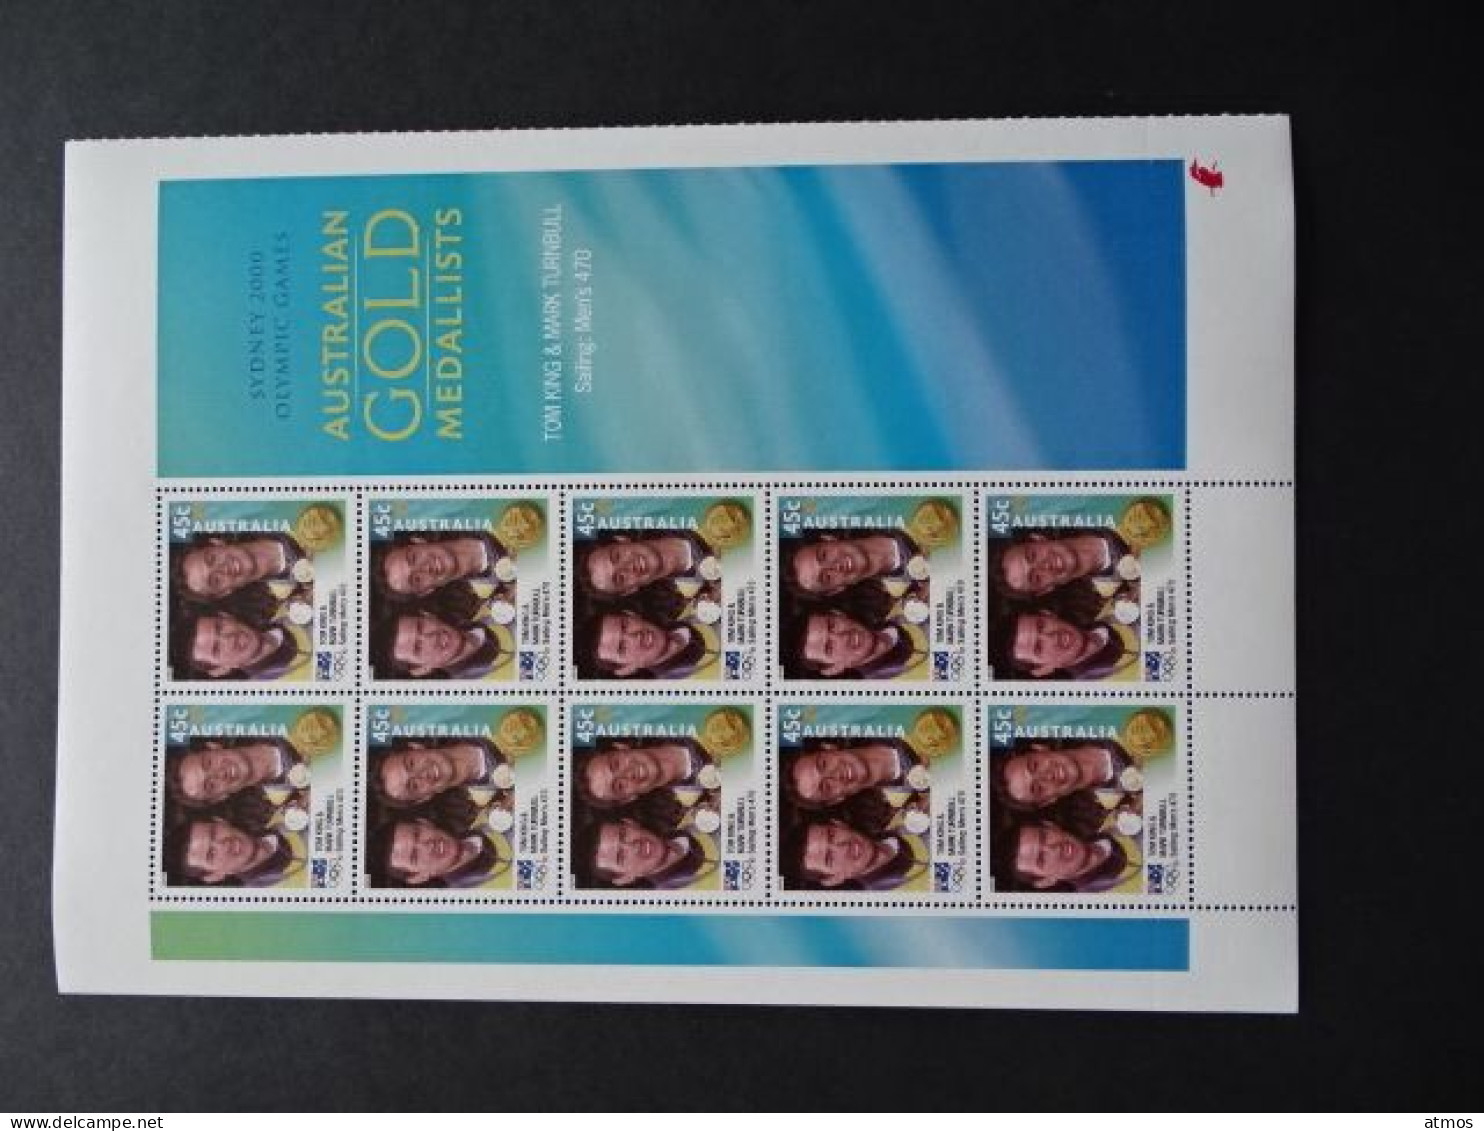 Australia MNH Michel Nr 1988 Sheet Of 10 From 2000 ACT - Mint Stamps